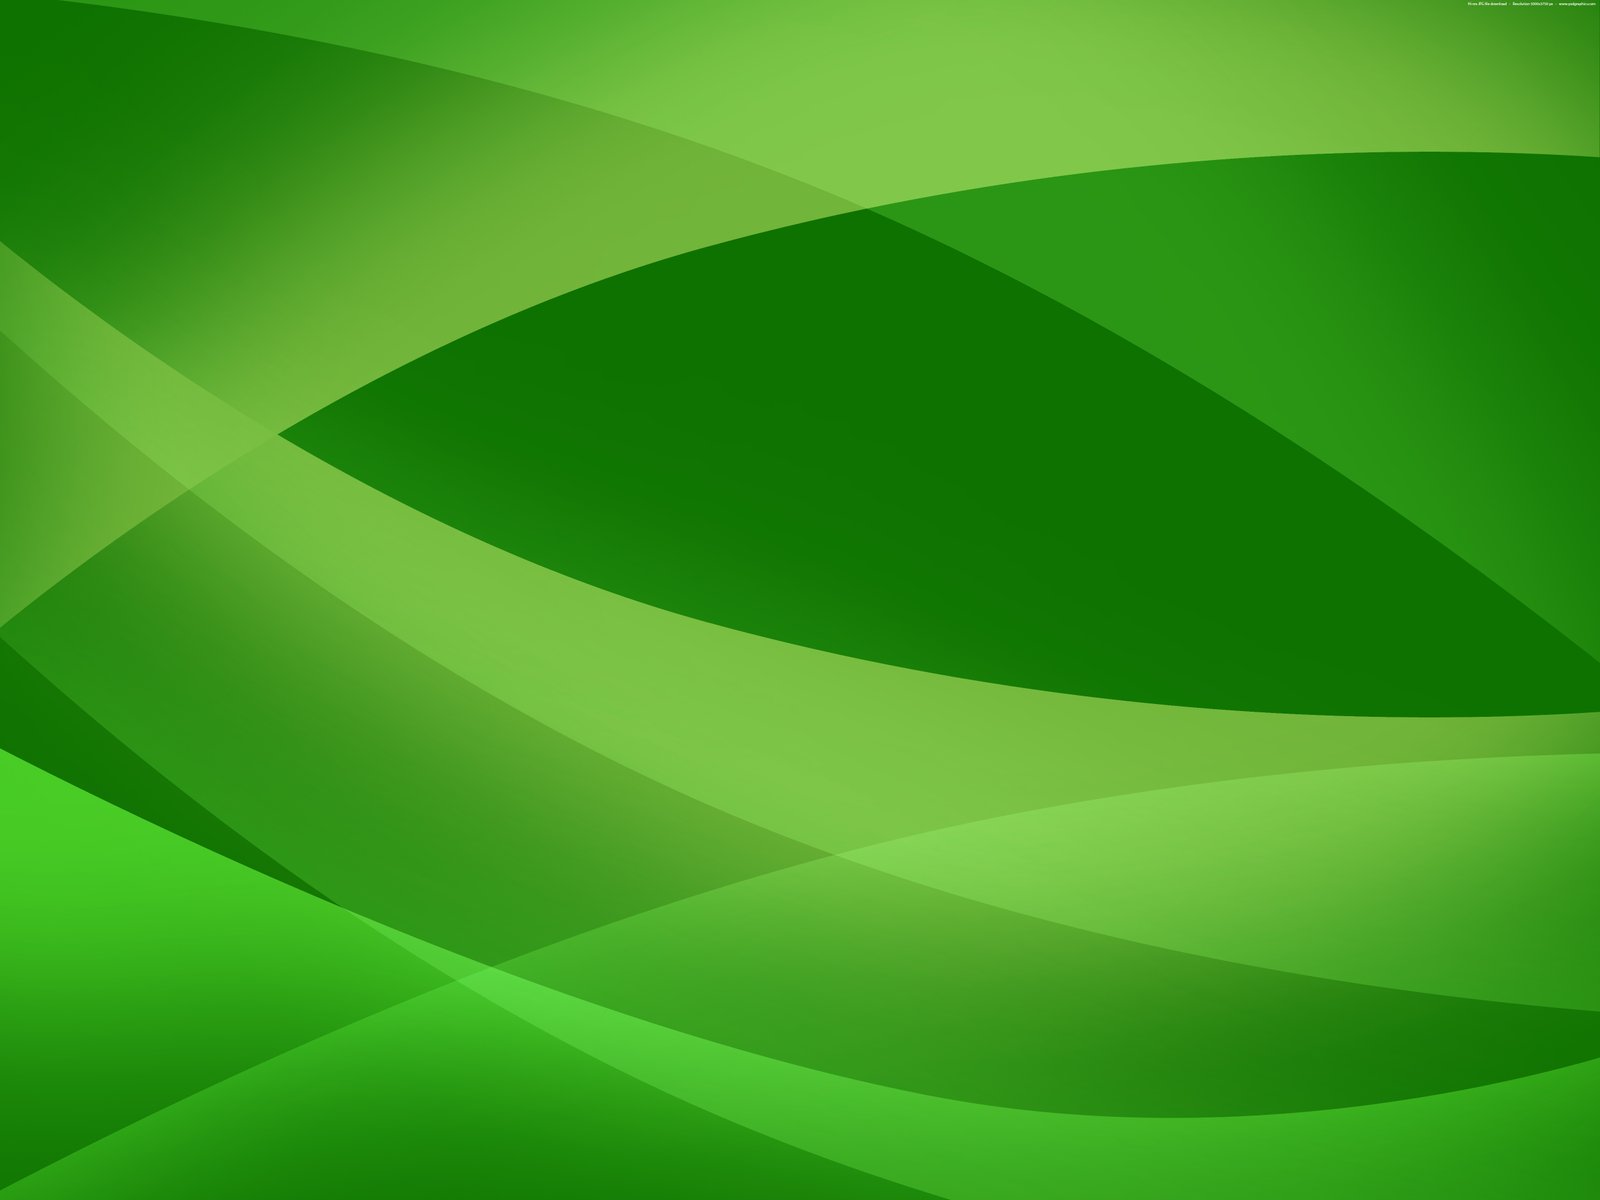 green background clipart - photo #35